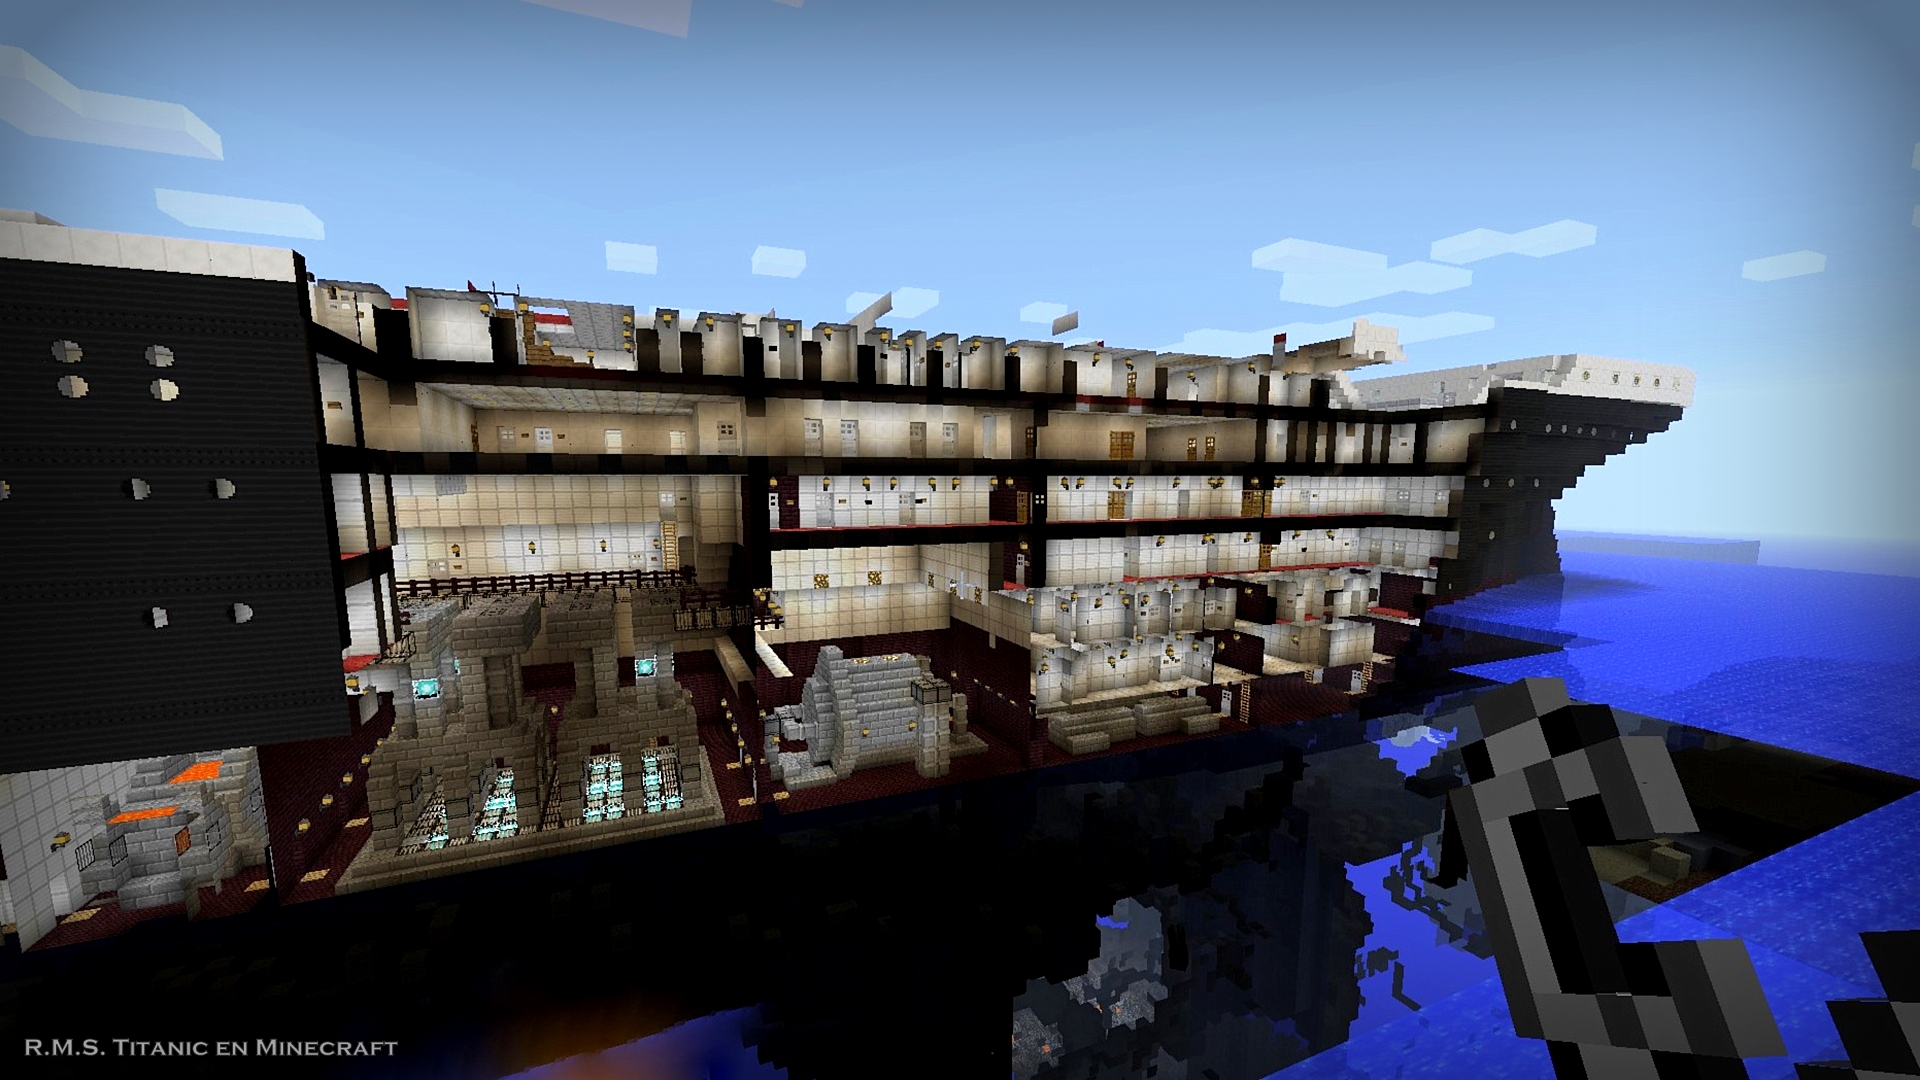 R.M.S. Titanic in Minecraft: The Grand Staircase - The ...